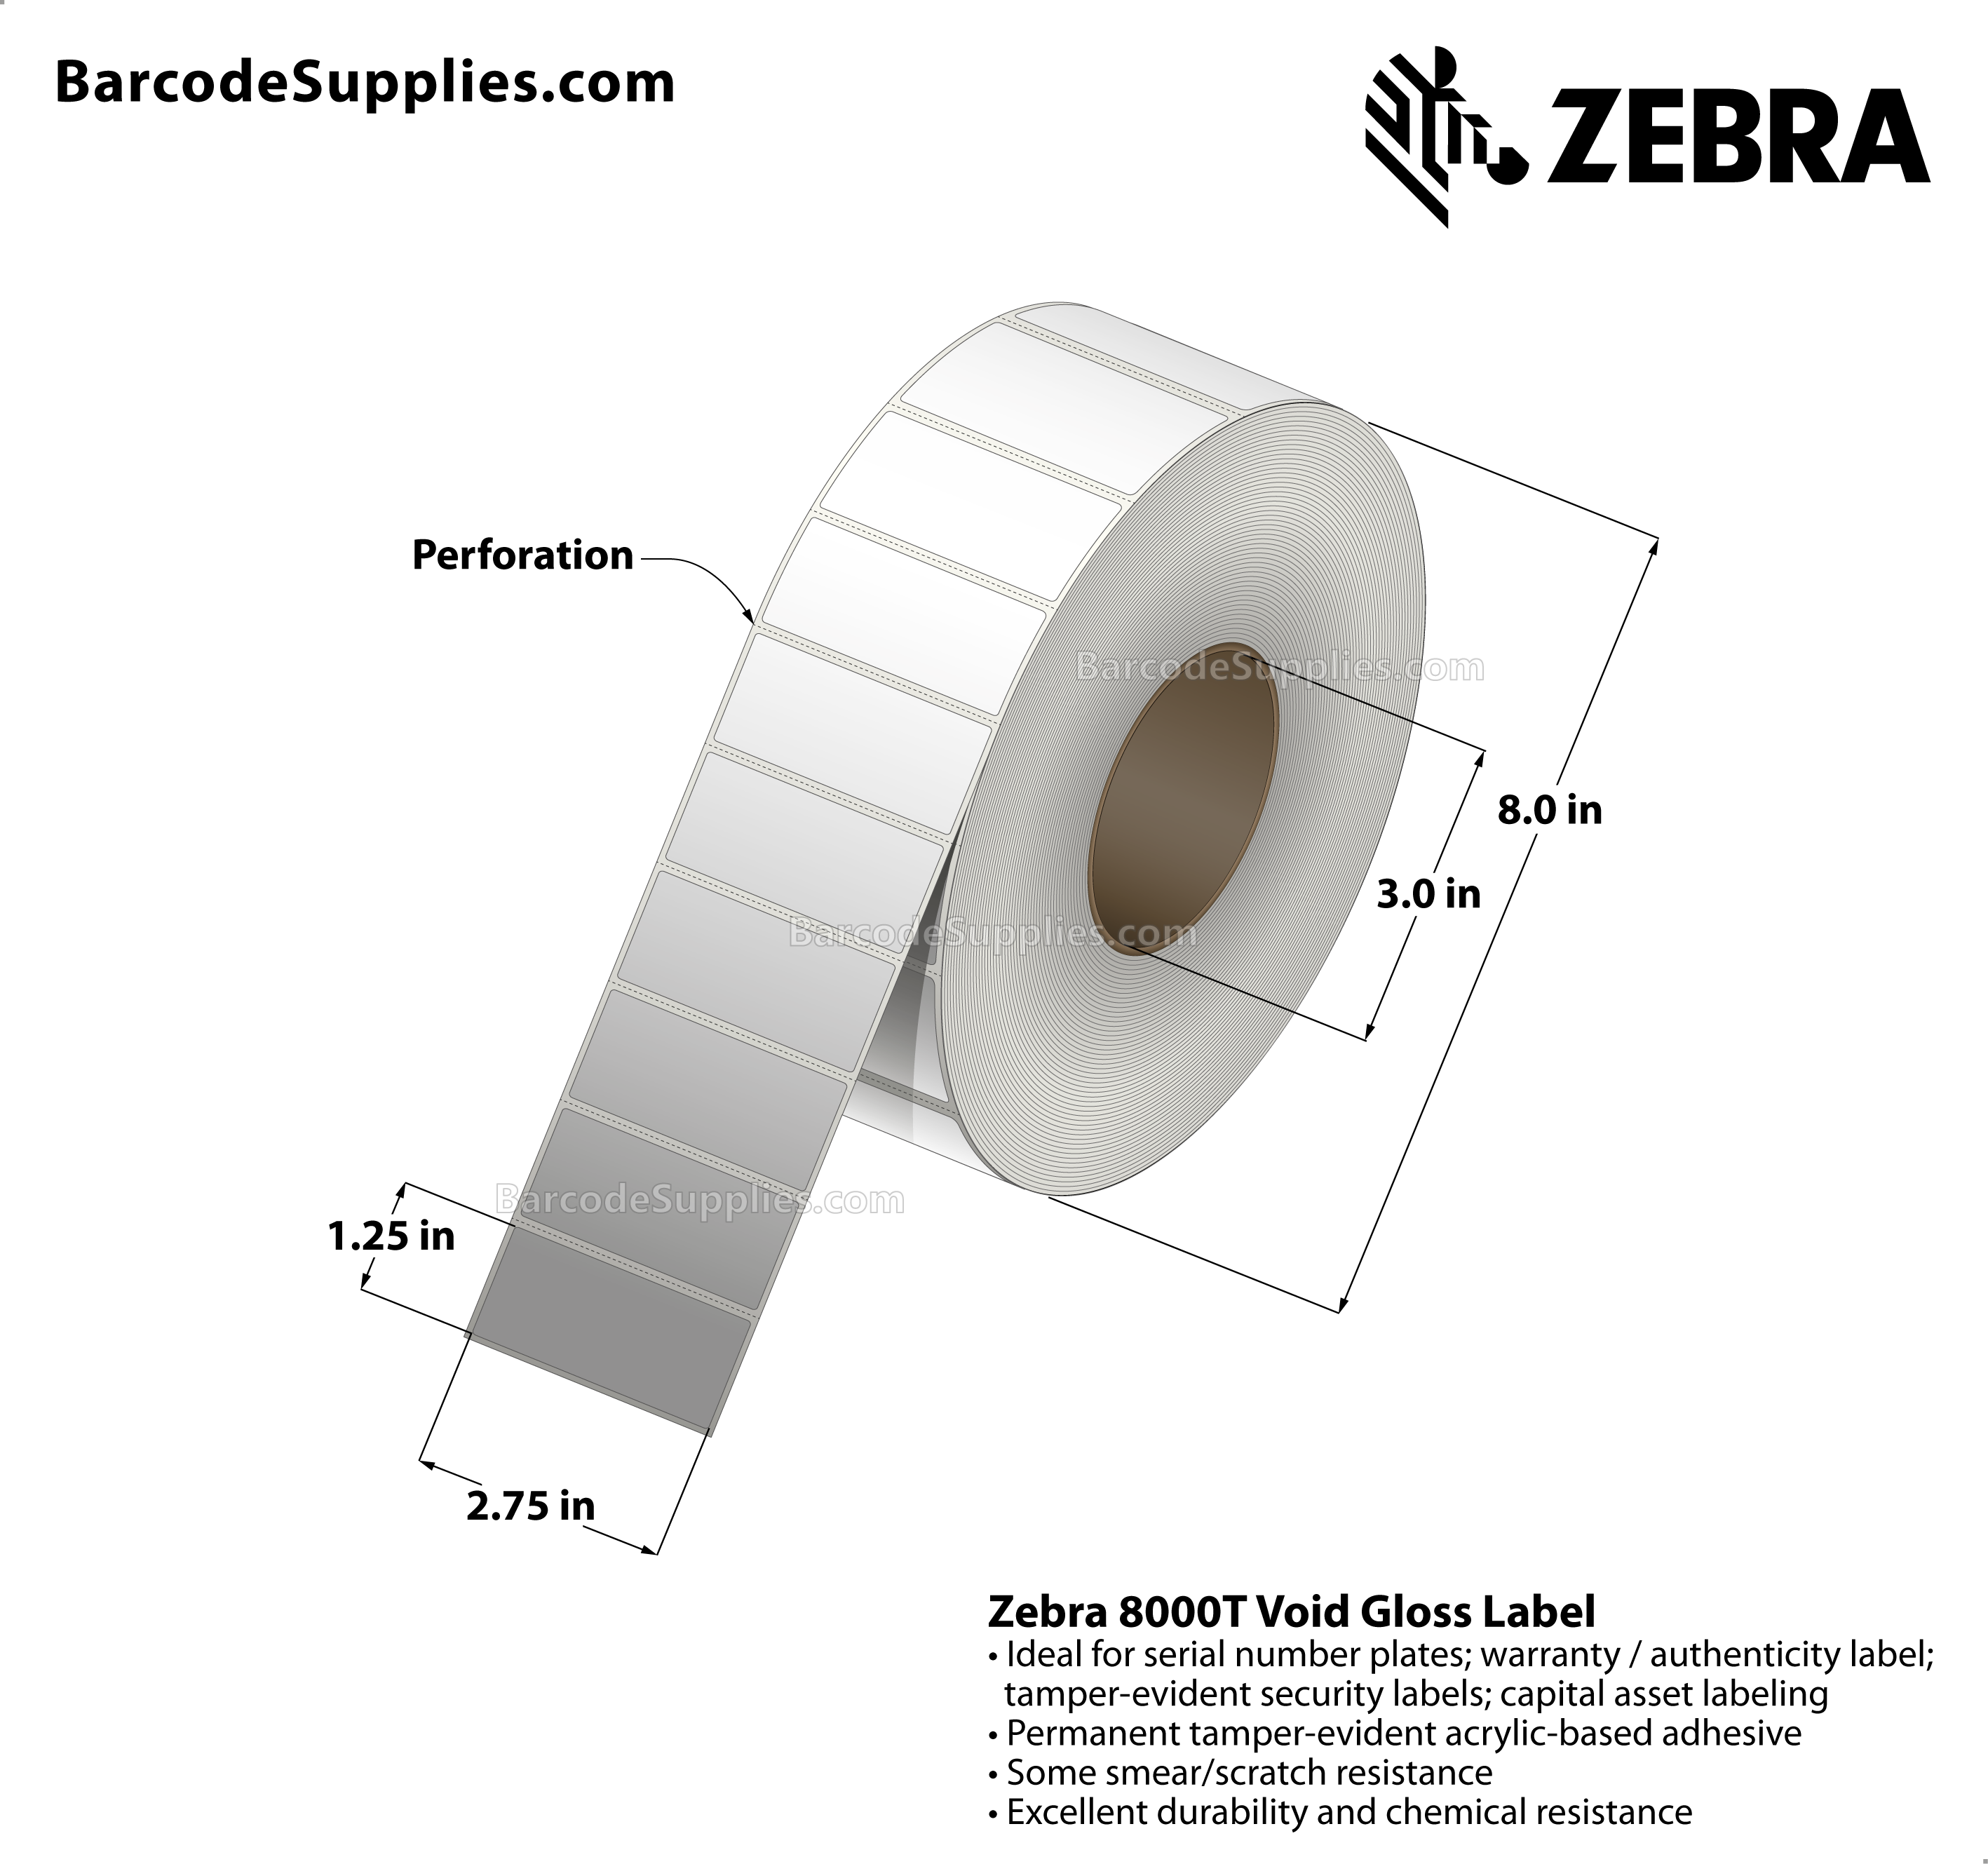 2.75 x 1.25 Thermal Transfer White 8000T Void Gloss Labels With Tamper-evident Adhesive - Perforated - 3000 Labels Per Roll - Carton Of 1 Rolls - 3000 Labels Total - MPN: 10023260